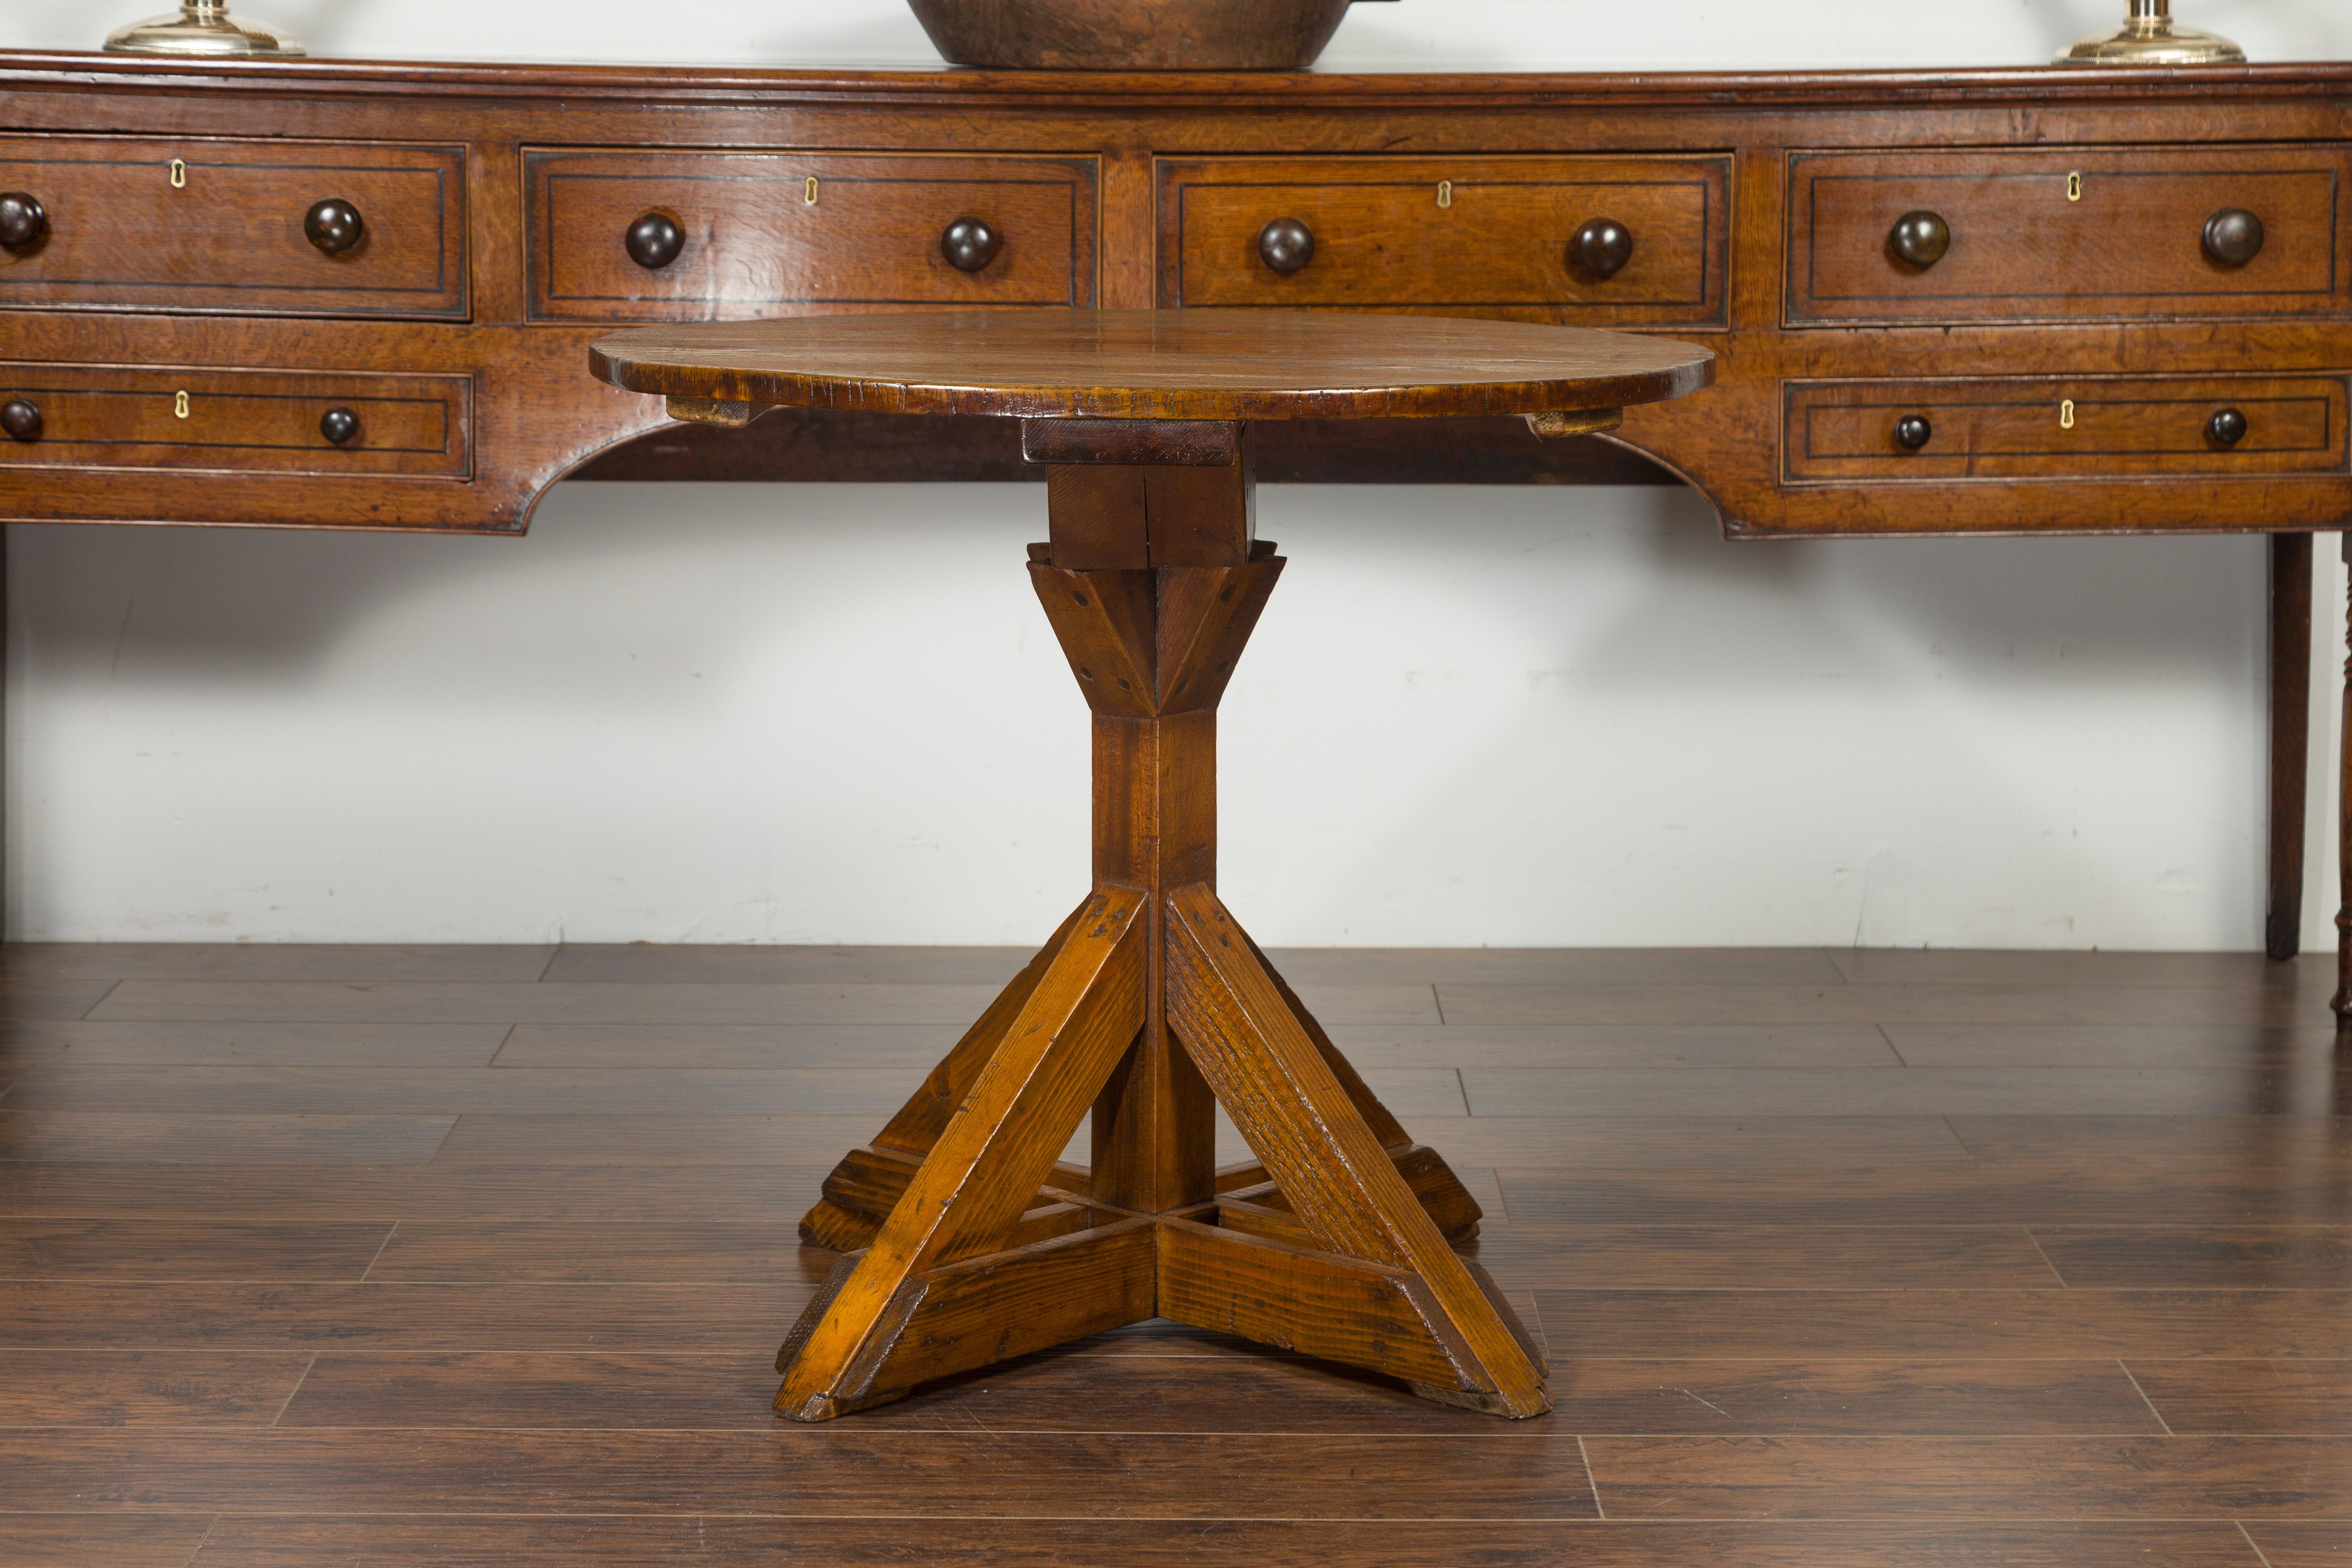 An English oak and pine sawbuck base side table from the mid-19th century, with circular top. Created in England during the third quarter of the 19th century, this rare oak and pine side table features a circular top sitting above a sawbuck base.